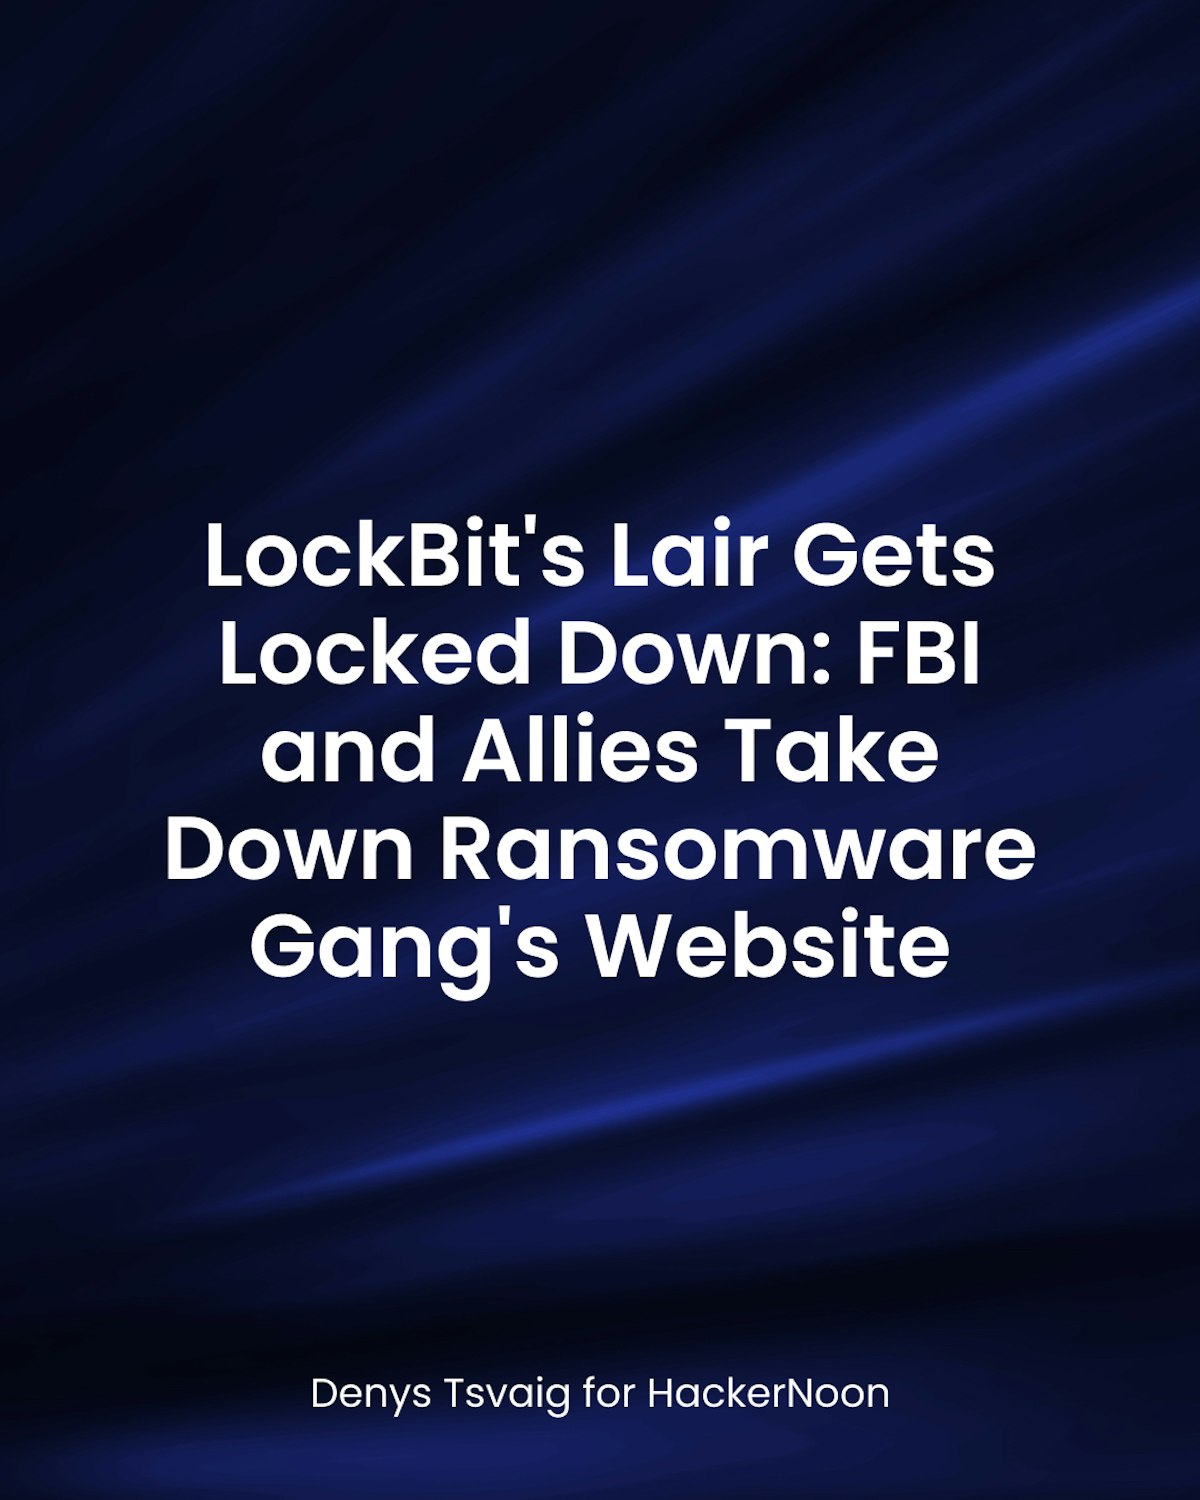 featured image - LockBit's Lair Gets Locked Down: FBI and Allies Take Down Ransomware Gang's Website